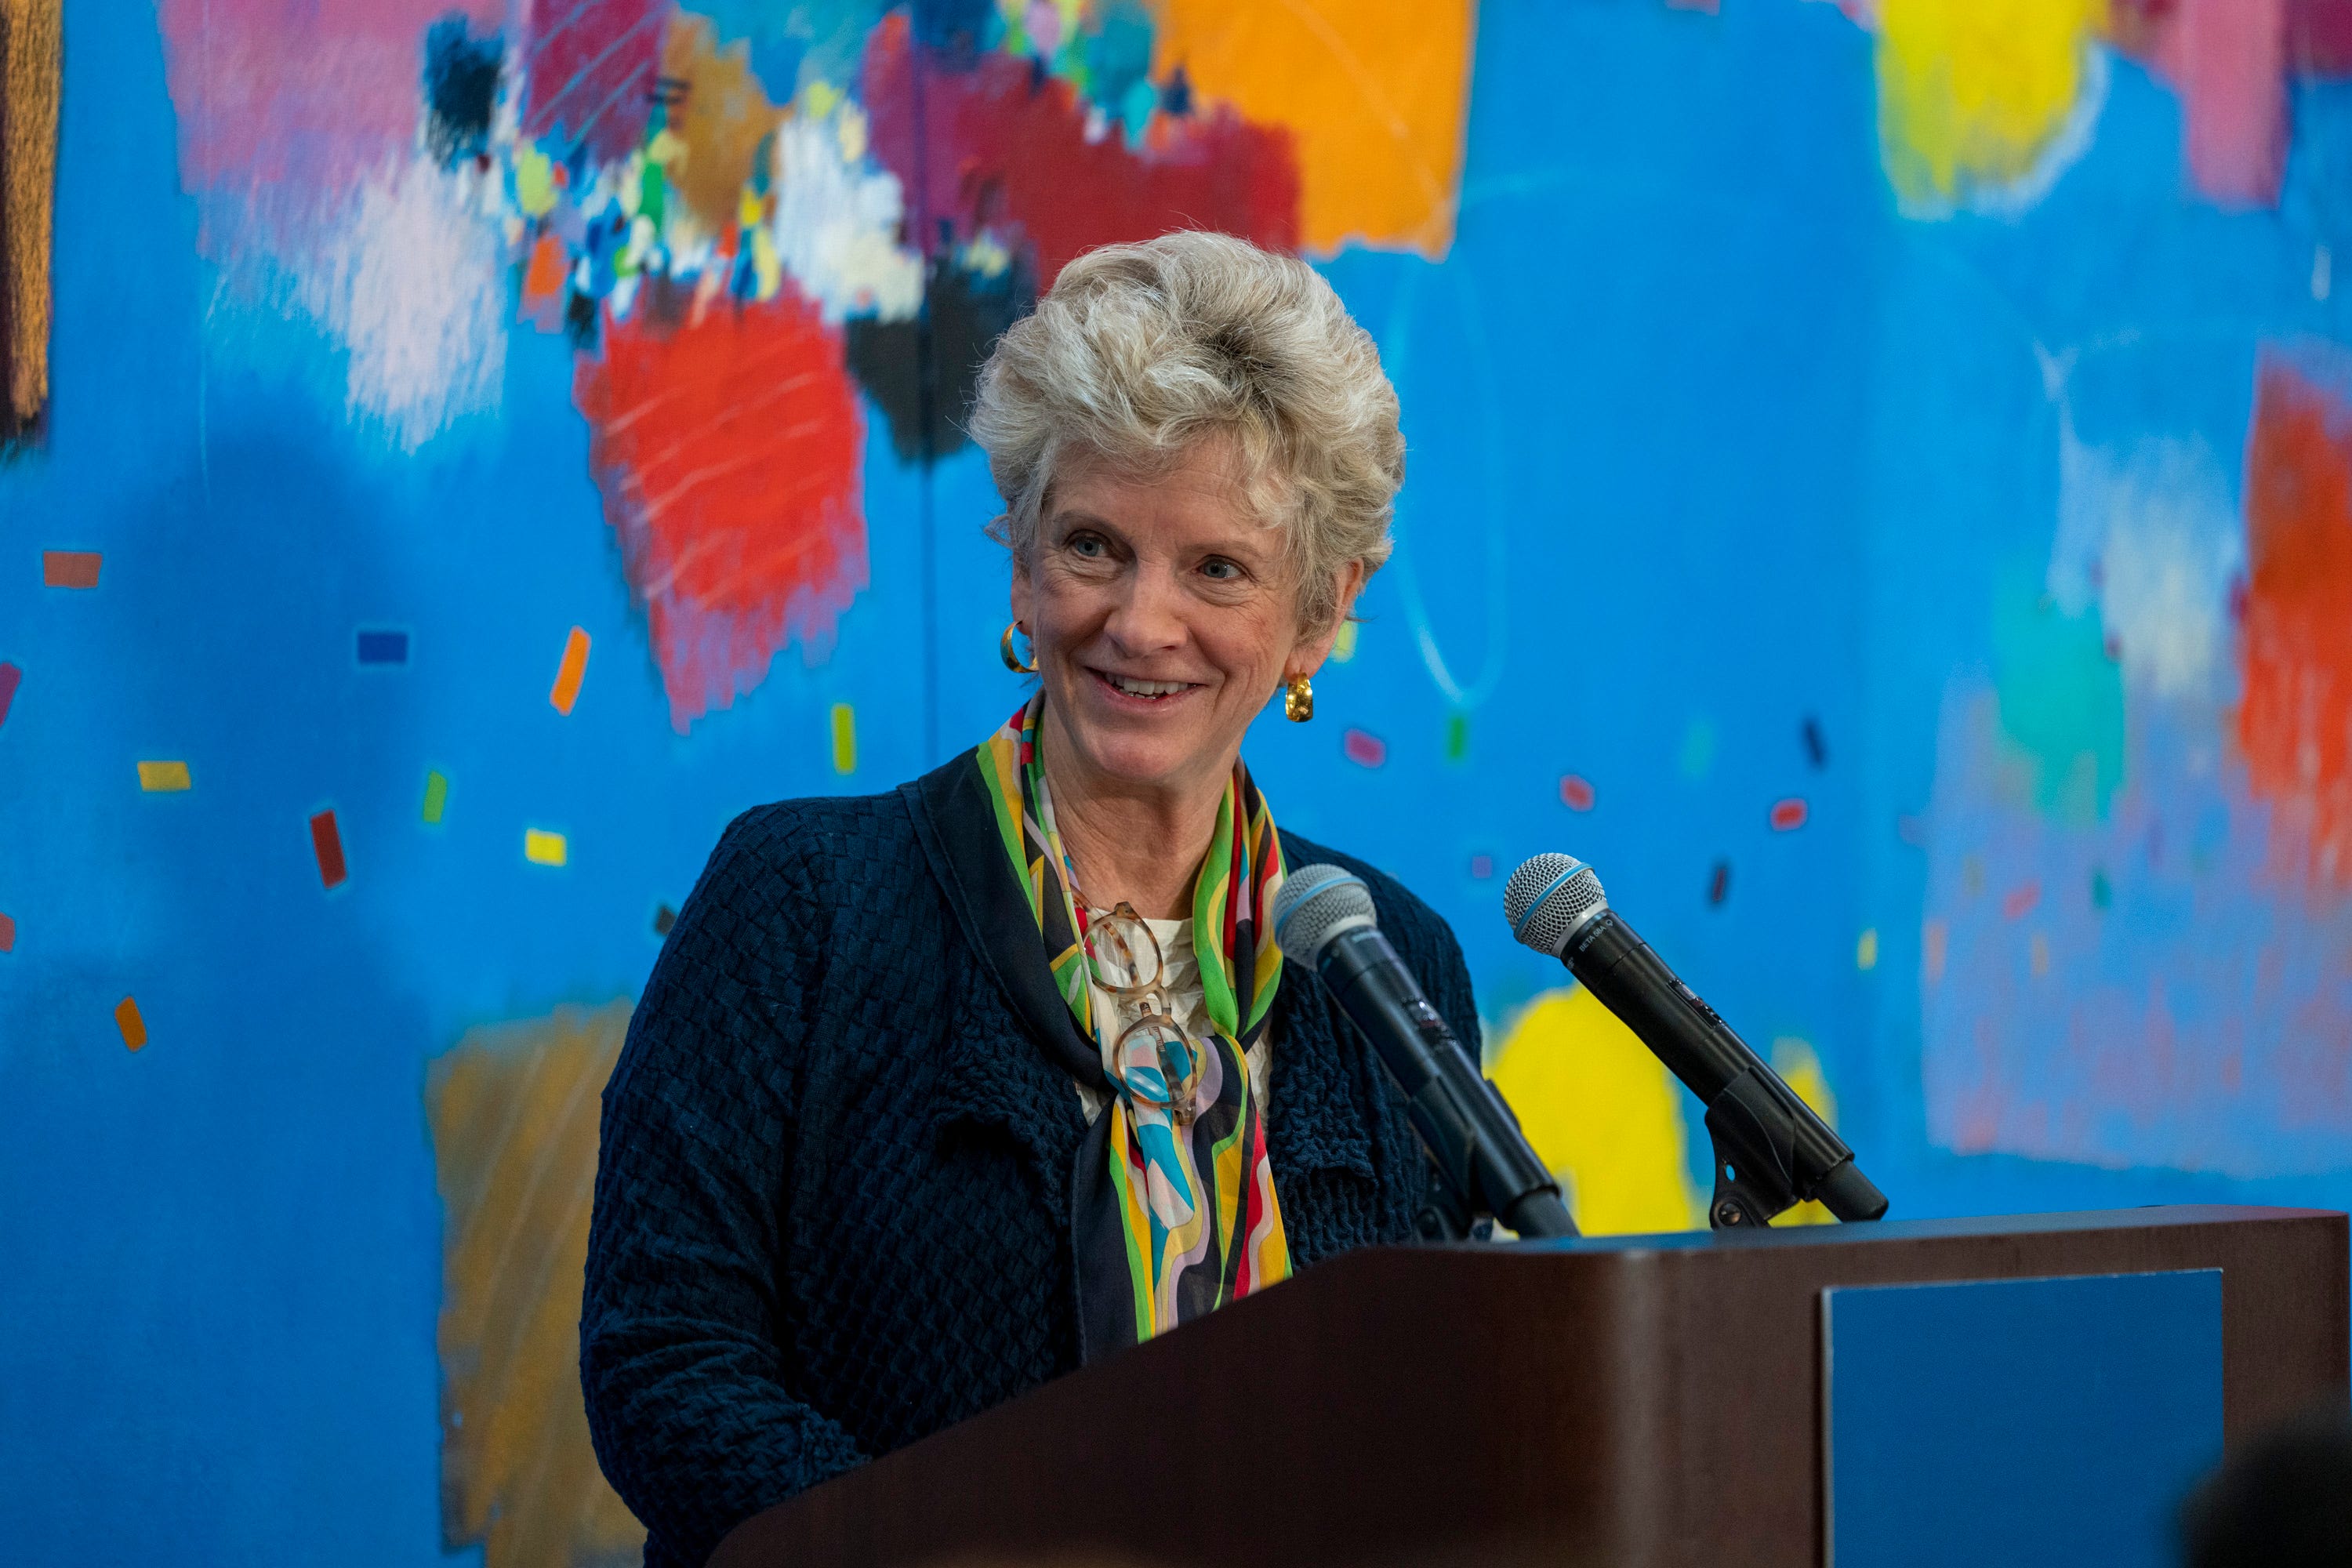 Administrator Robin Carnahan of the U.S. General Services Administration speaks in Philadelphia, PA, on February 17, 2022, at an event to commemorate the completion and installation of The Fruit of the Spirit, a large painting commissioned under GSA’s Art in Architecture program and created by the late Philadelphia artist, Moe Brooker.